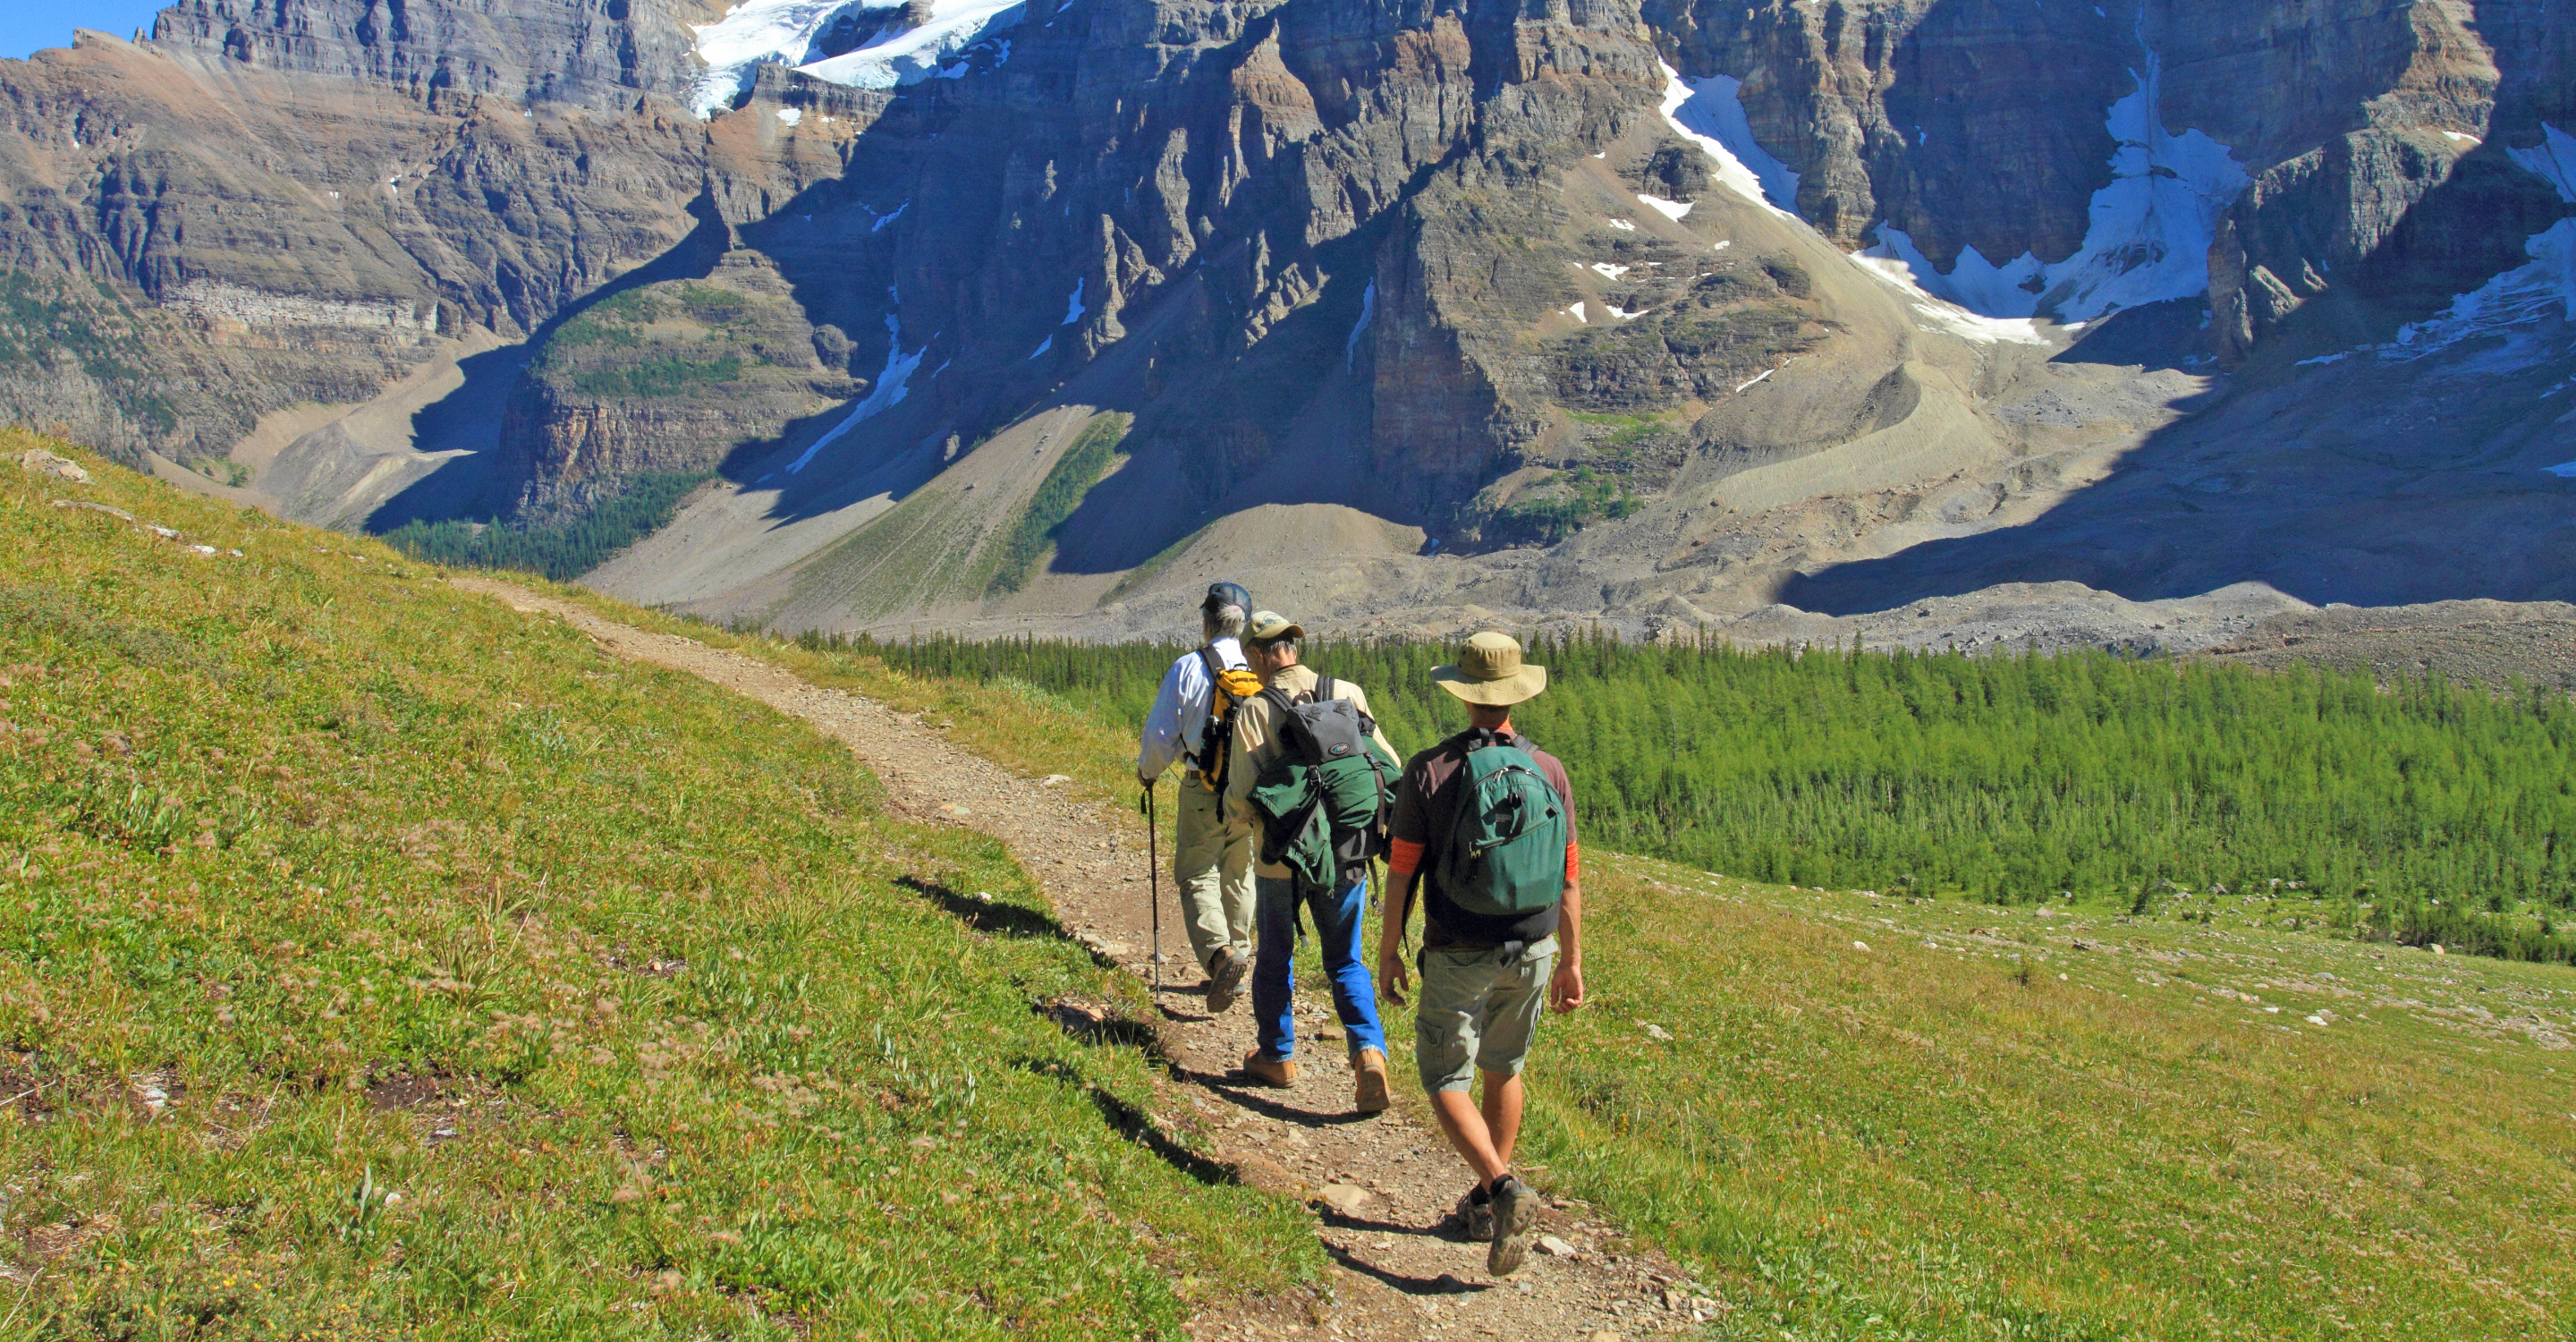 A group of hikers near Lake Moraine in Banff National Park, Alberta, Canada